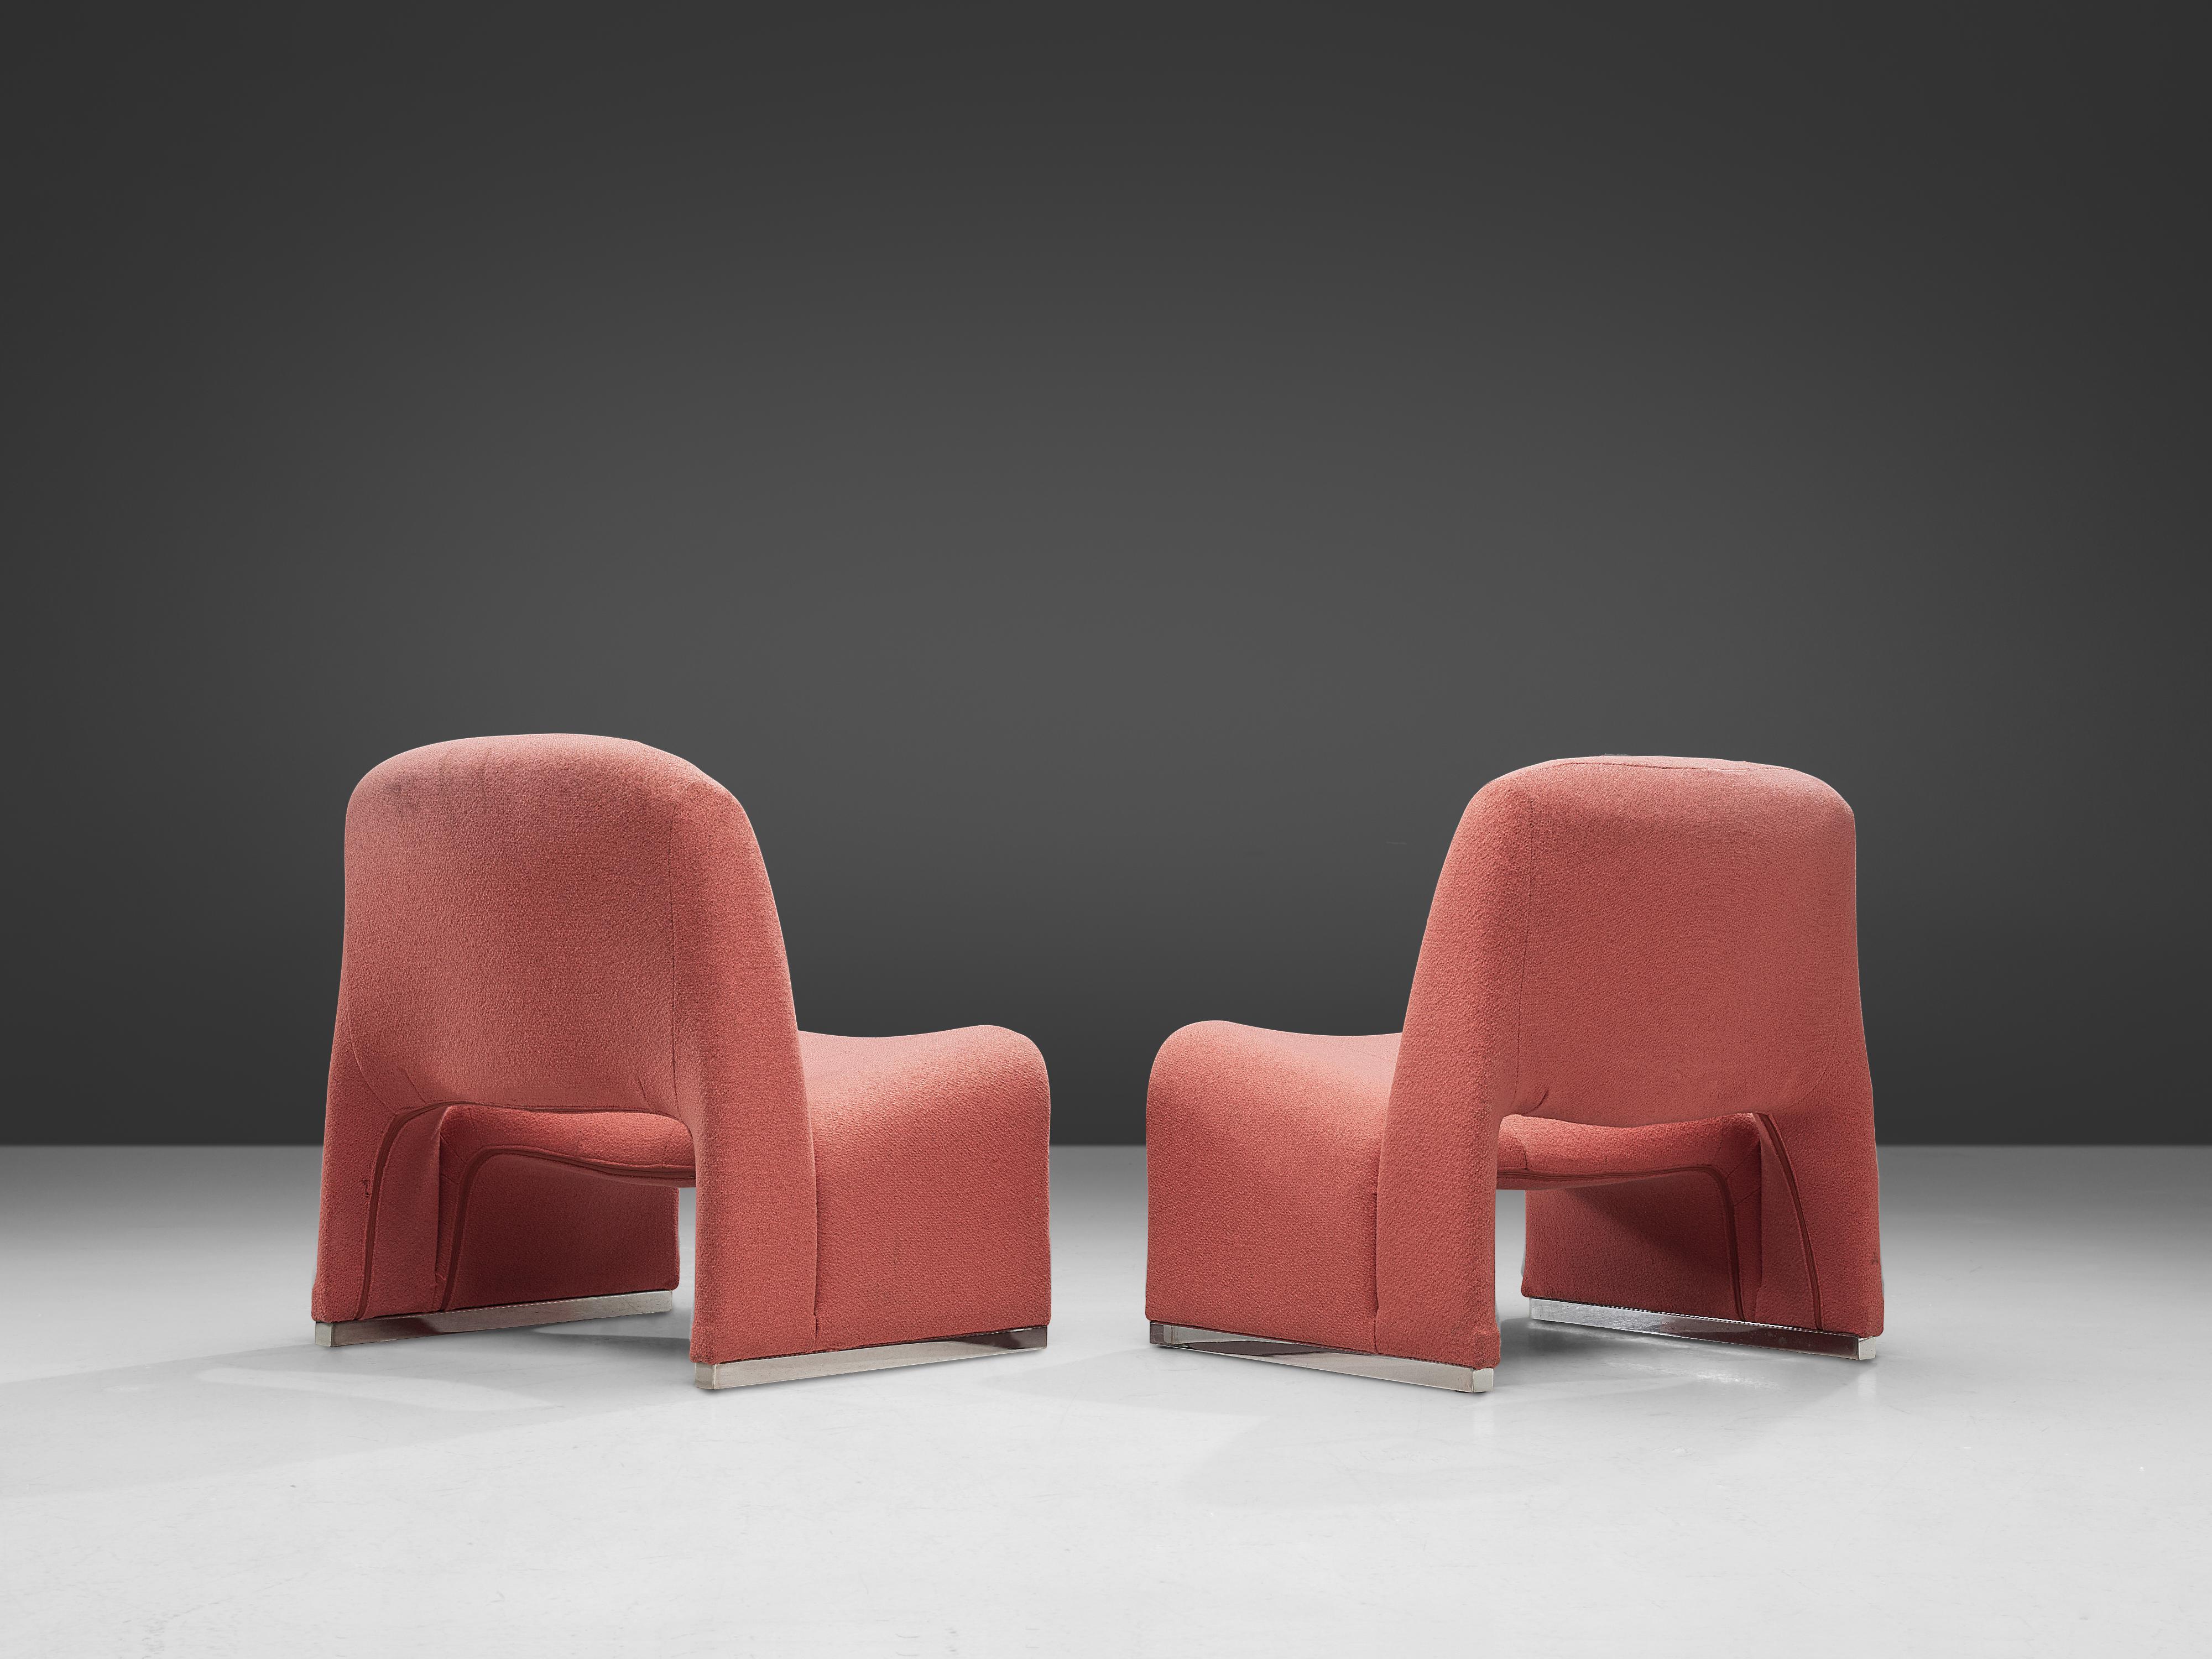 Late 20th Century ‘Alky’ Lounge Chairs in the style of Giancarlo Piretti